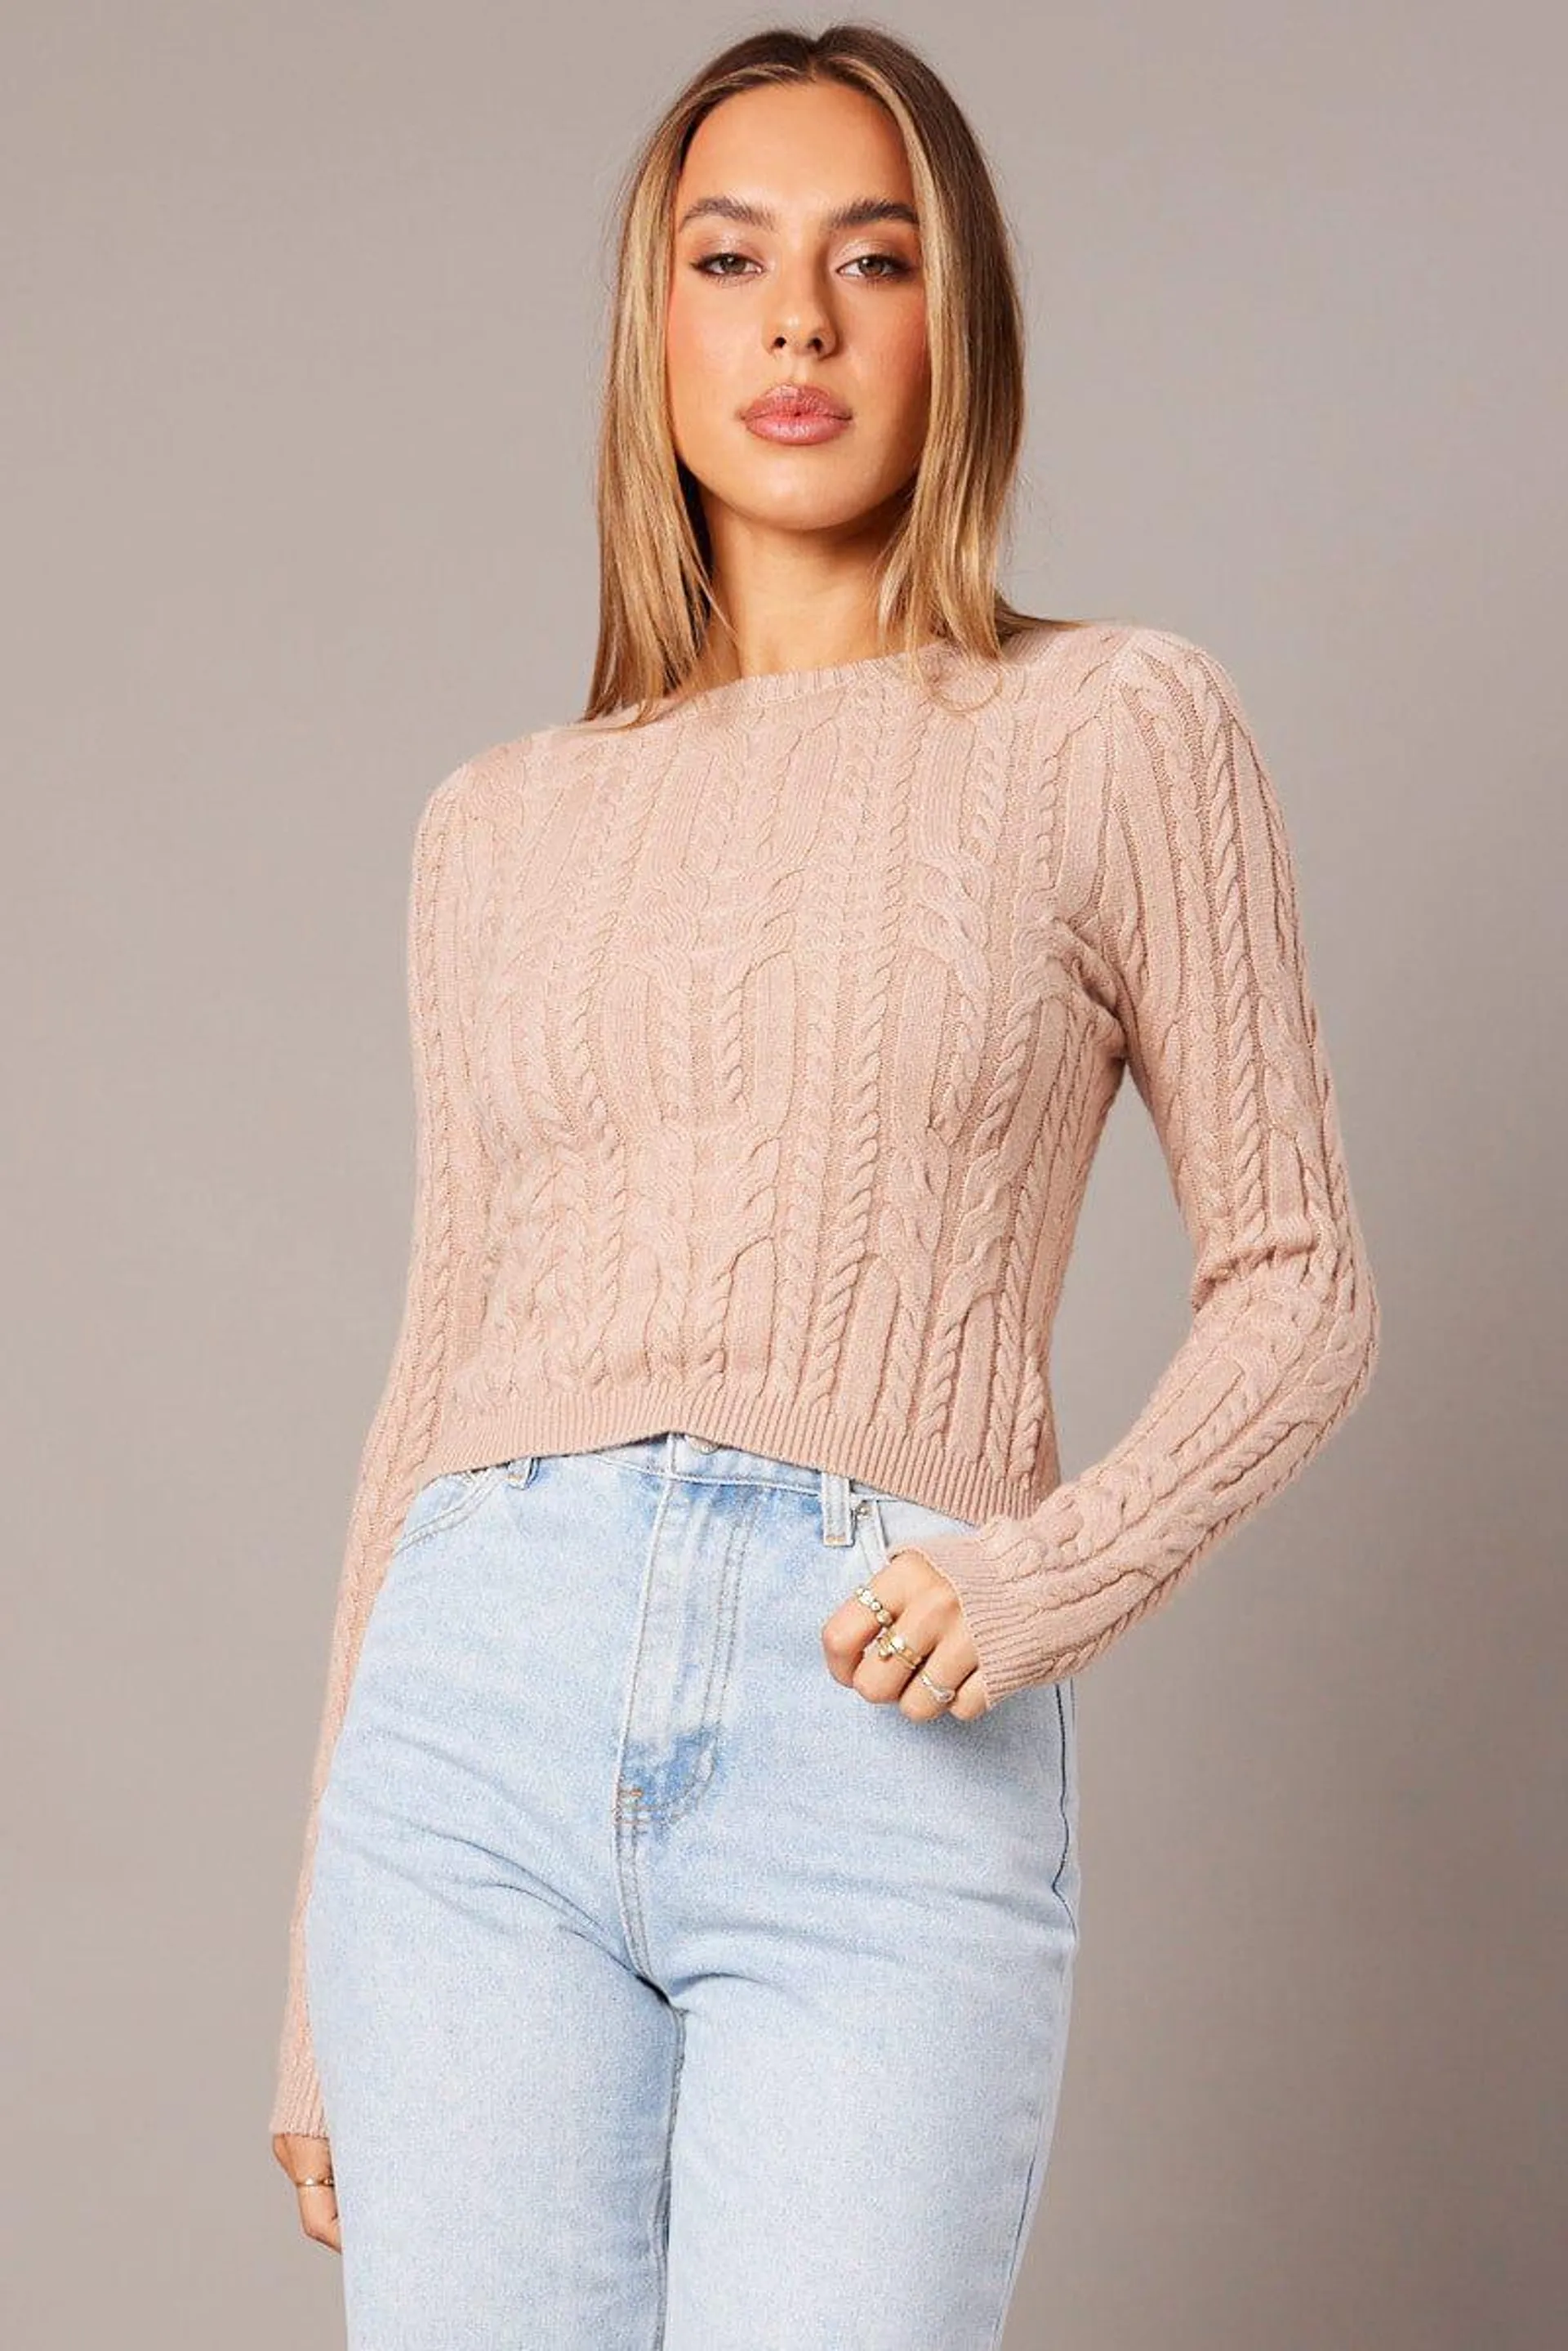 Beige Cable Knit Top Long Sleeve